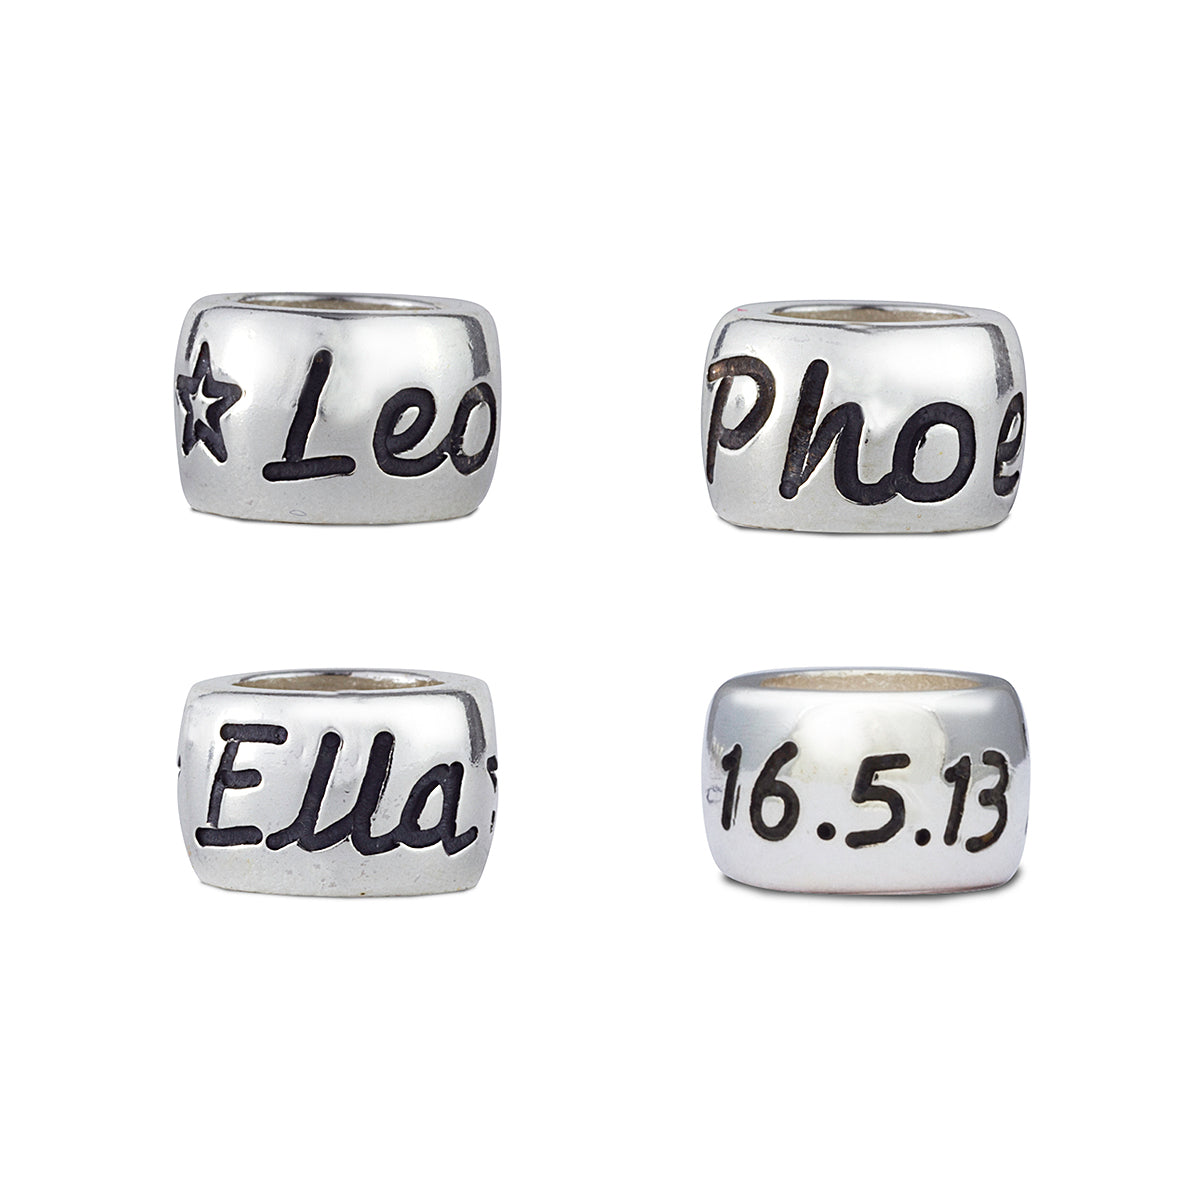 Personalised Silver Engraved Charm Bead Designer Charms That Fit Pandora Style Bracelet